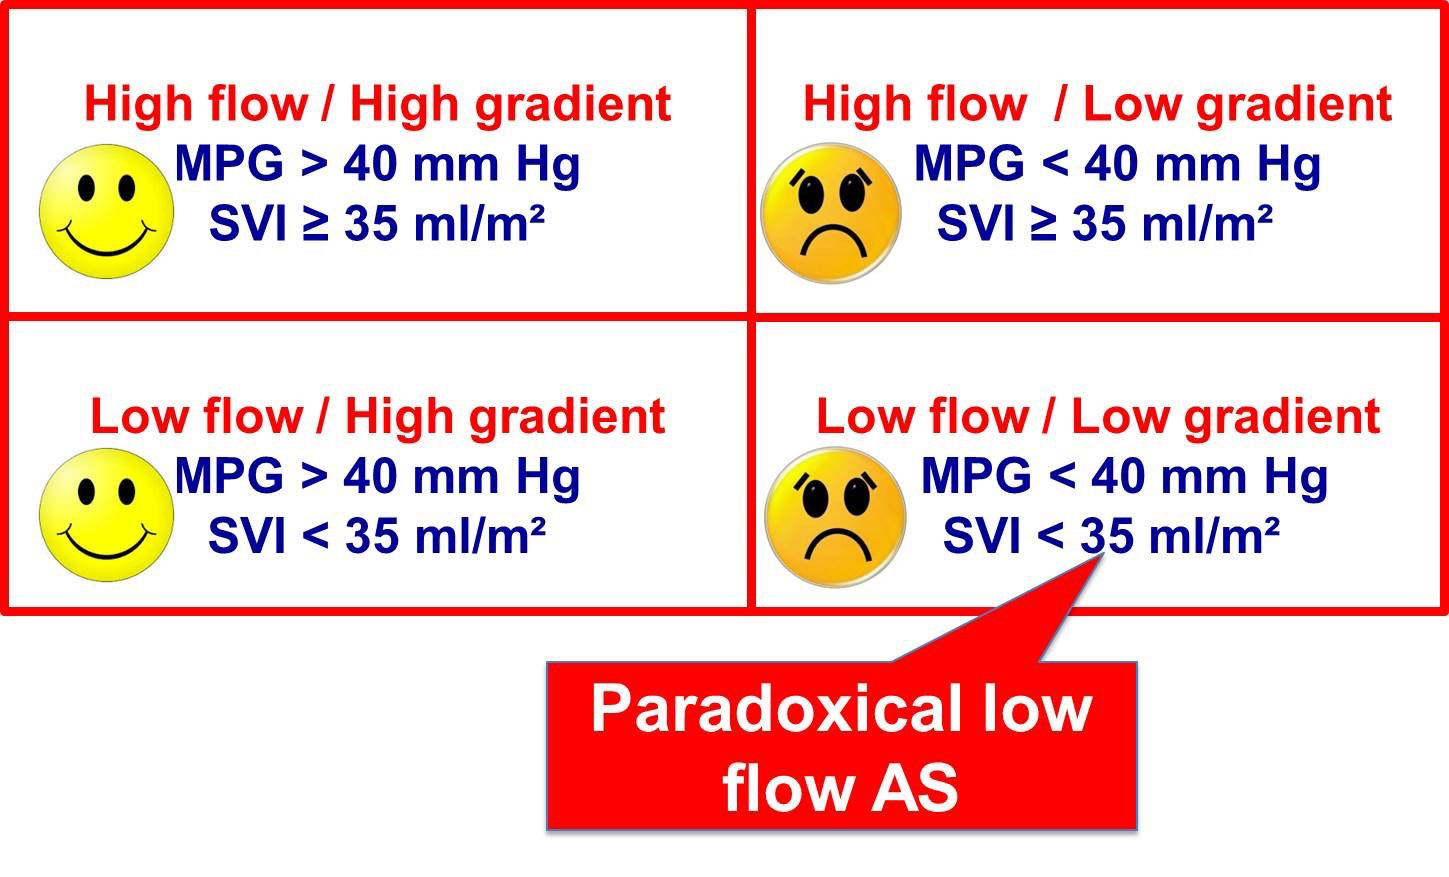 Aortic Stenosis Severity Chart